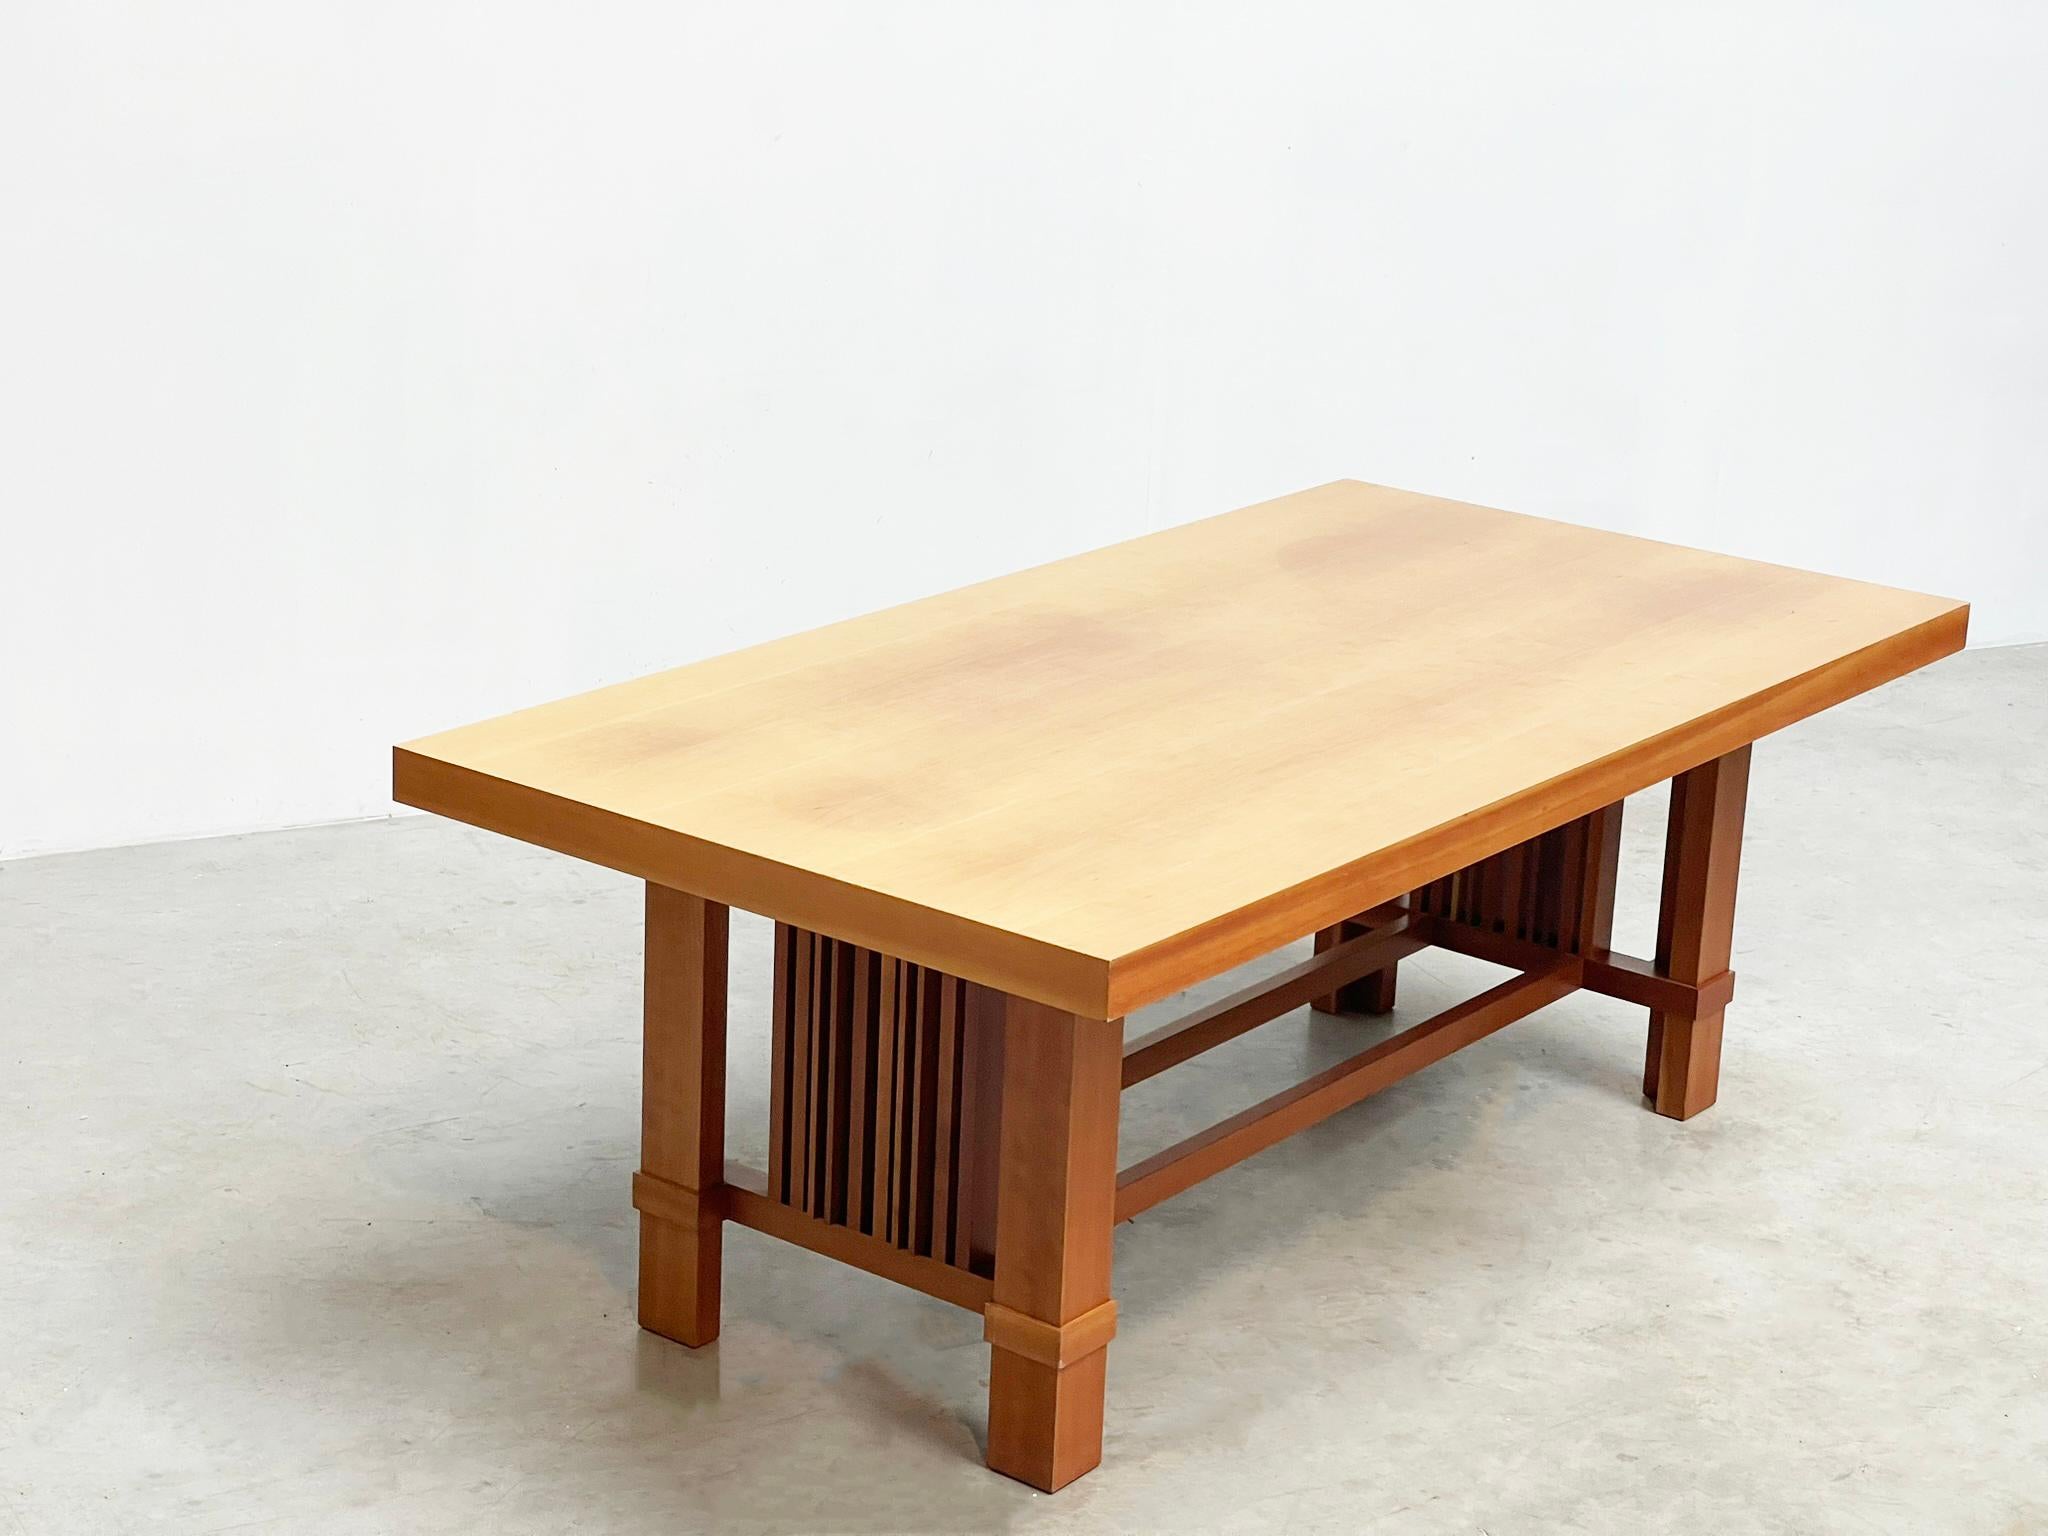 Frank Lloyd Wright “608 Taliesin” Dining Table signed by Cassina, 1986 For Sale 5